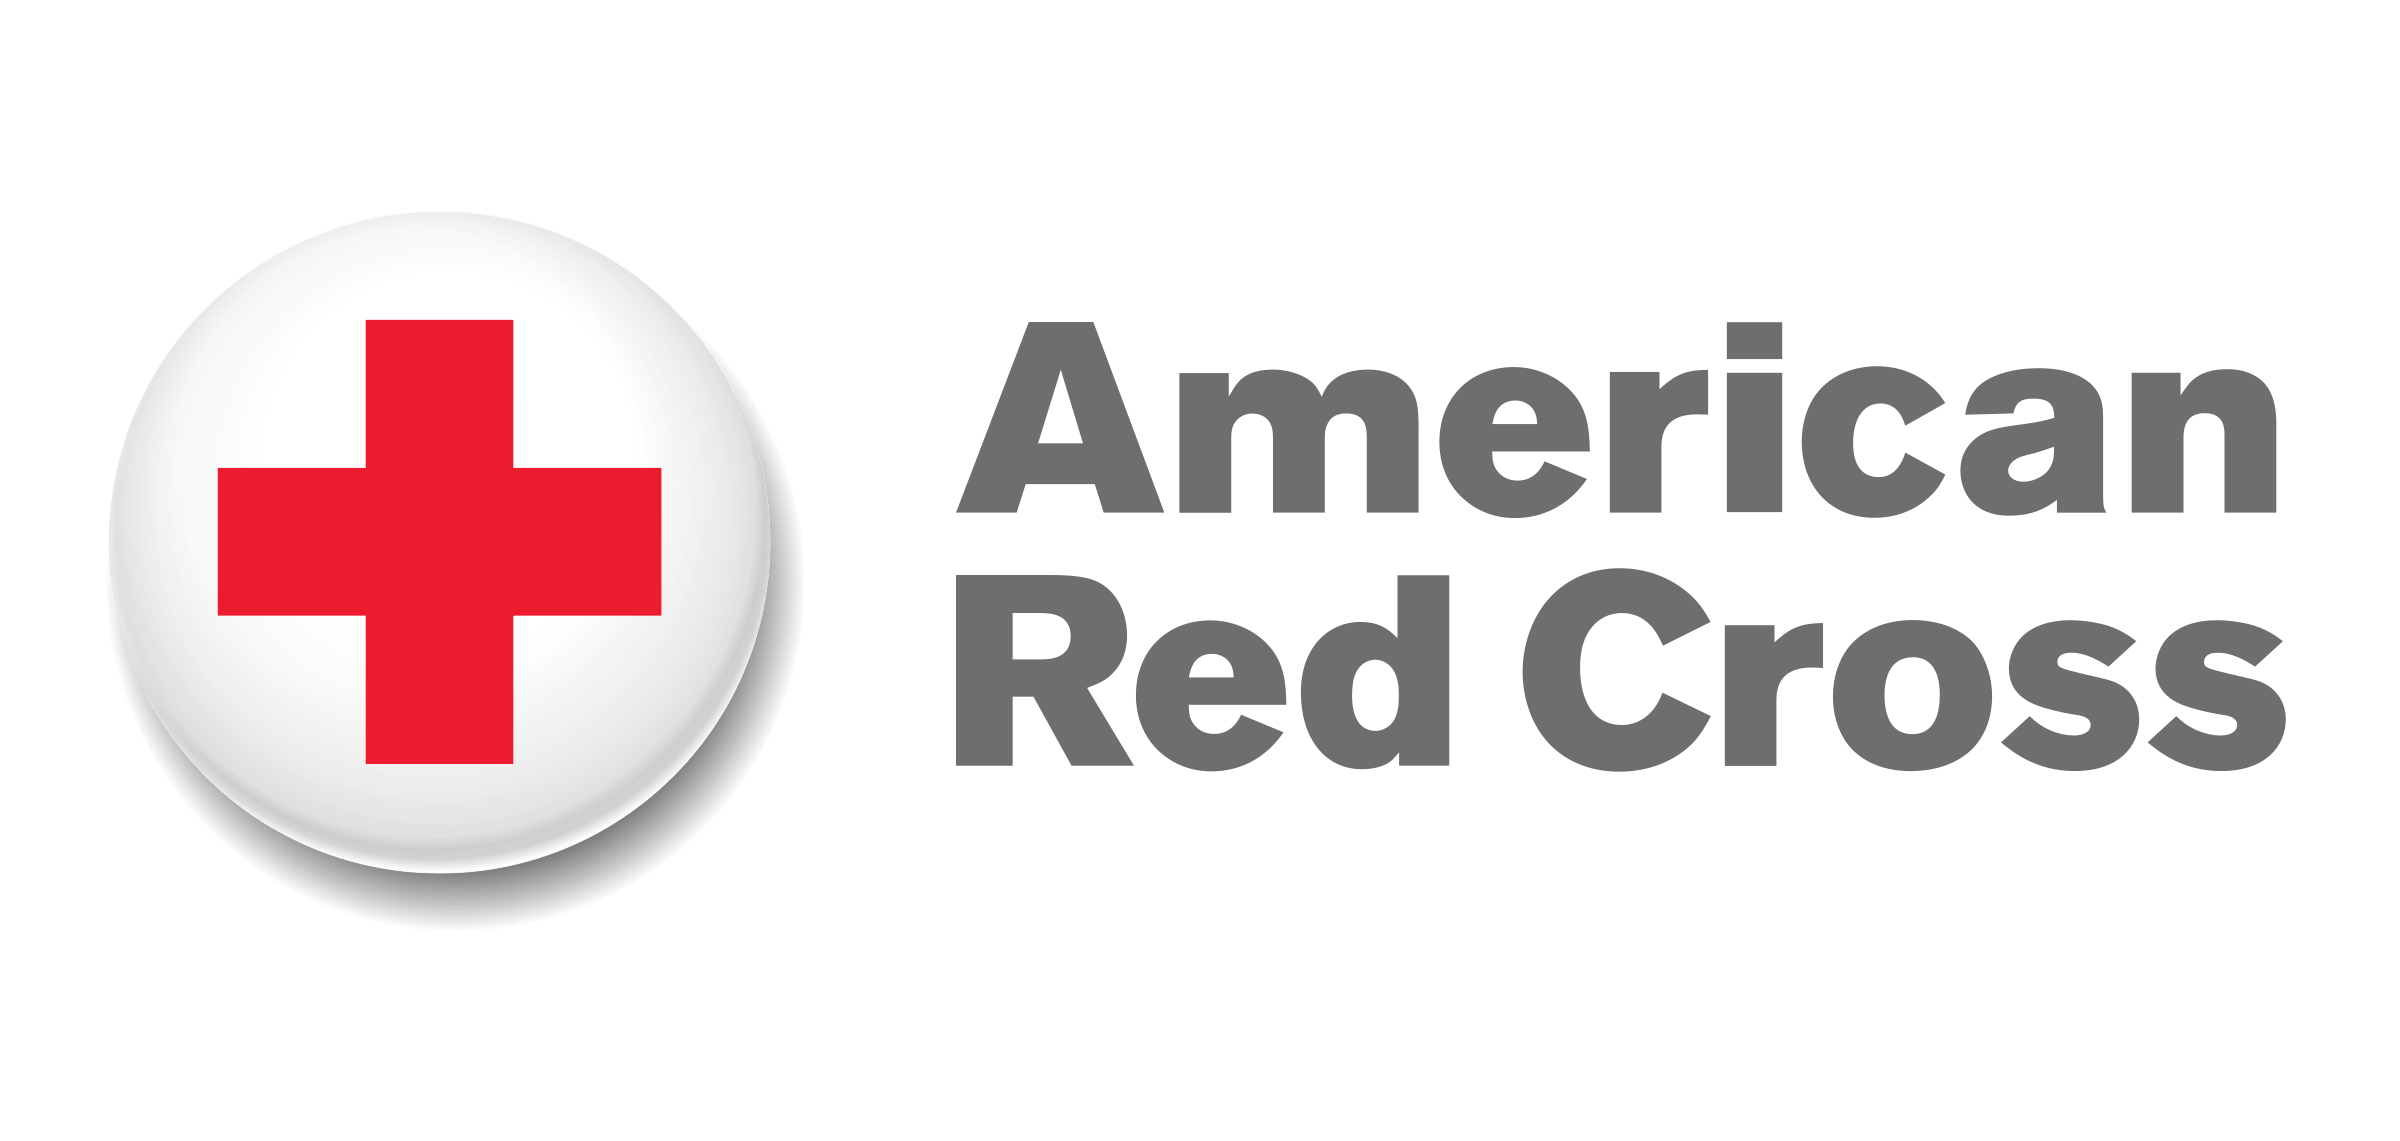 Big Picture of American Red Cross Logo - American Red Cross Logo PNG Transparent & SVG Vector